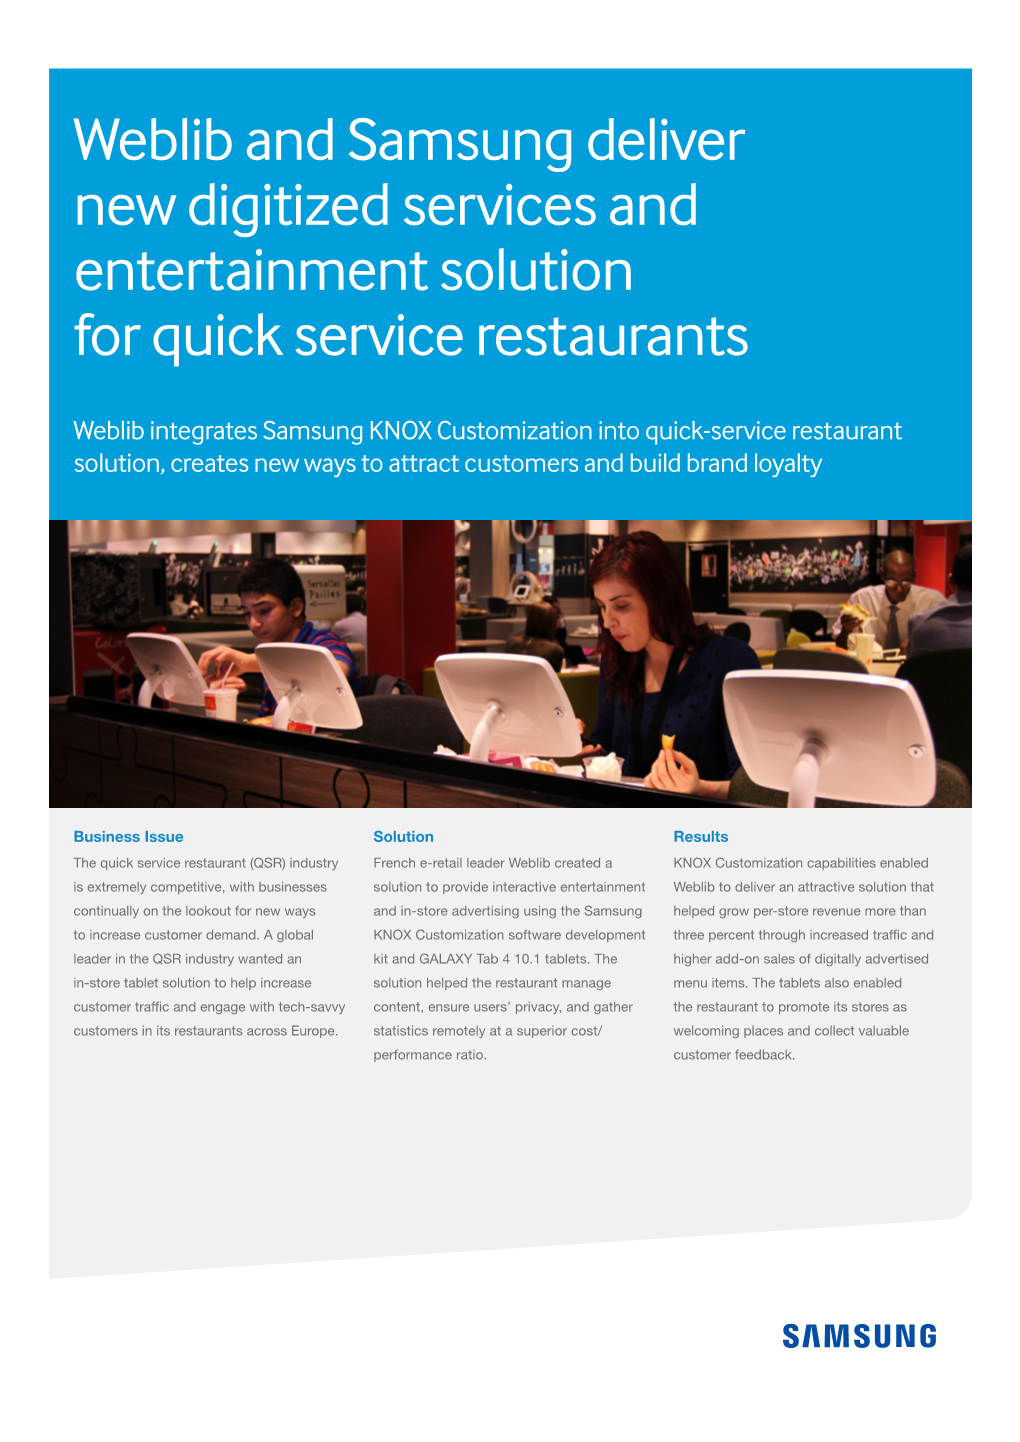 Weblib and Samsung Deliver New Digitized Services and Entertainment Solution for Quick Service Restaurants